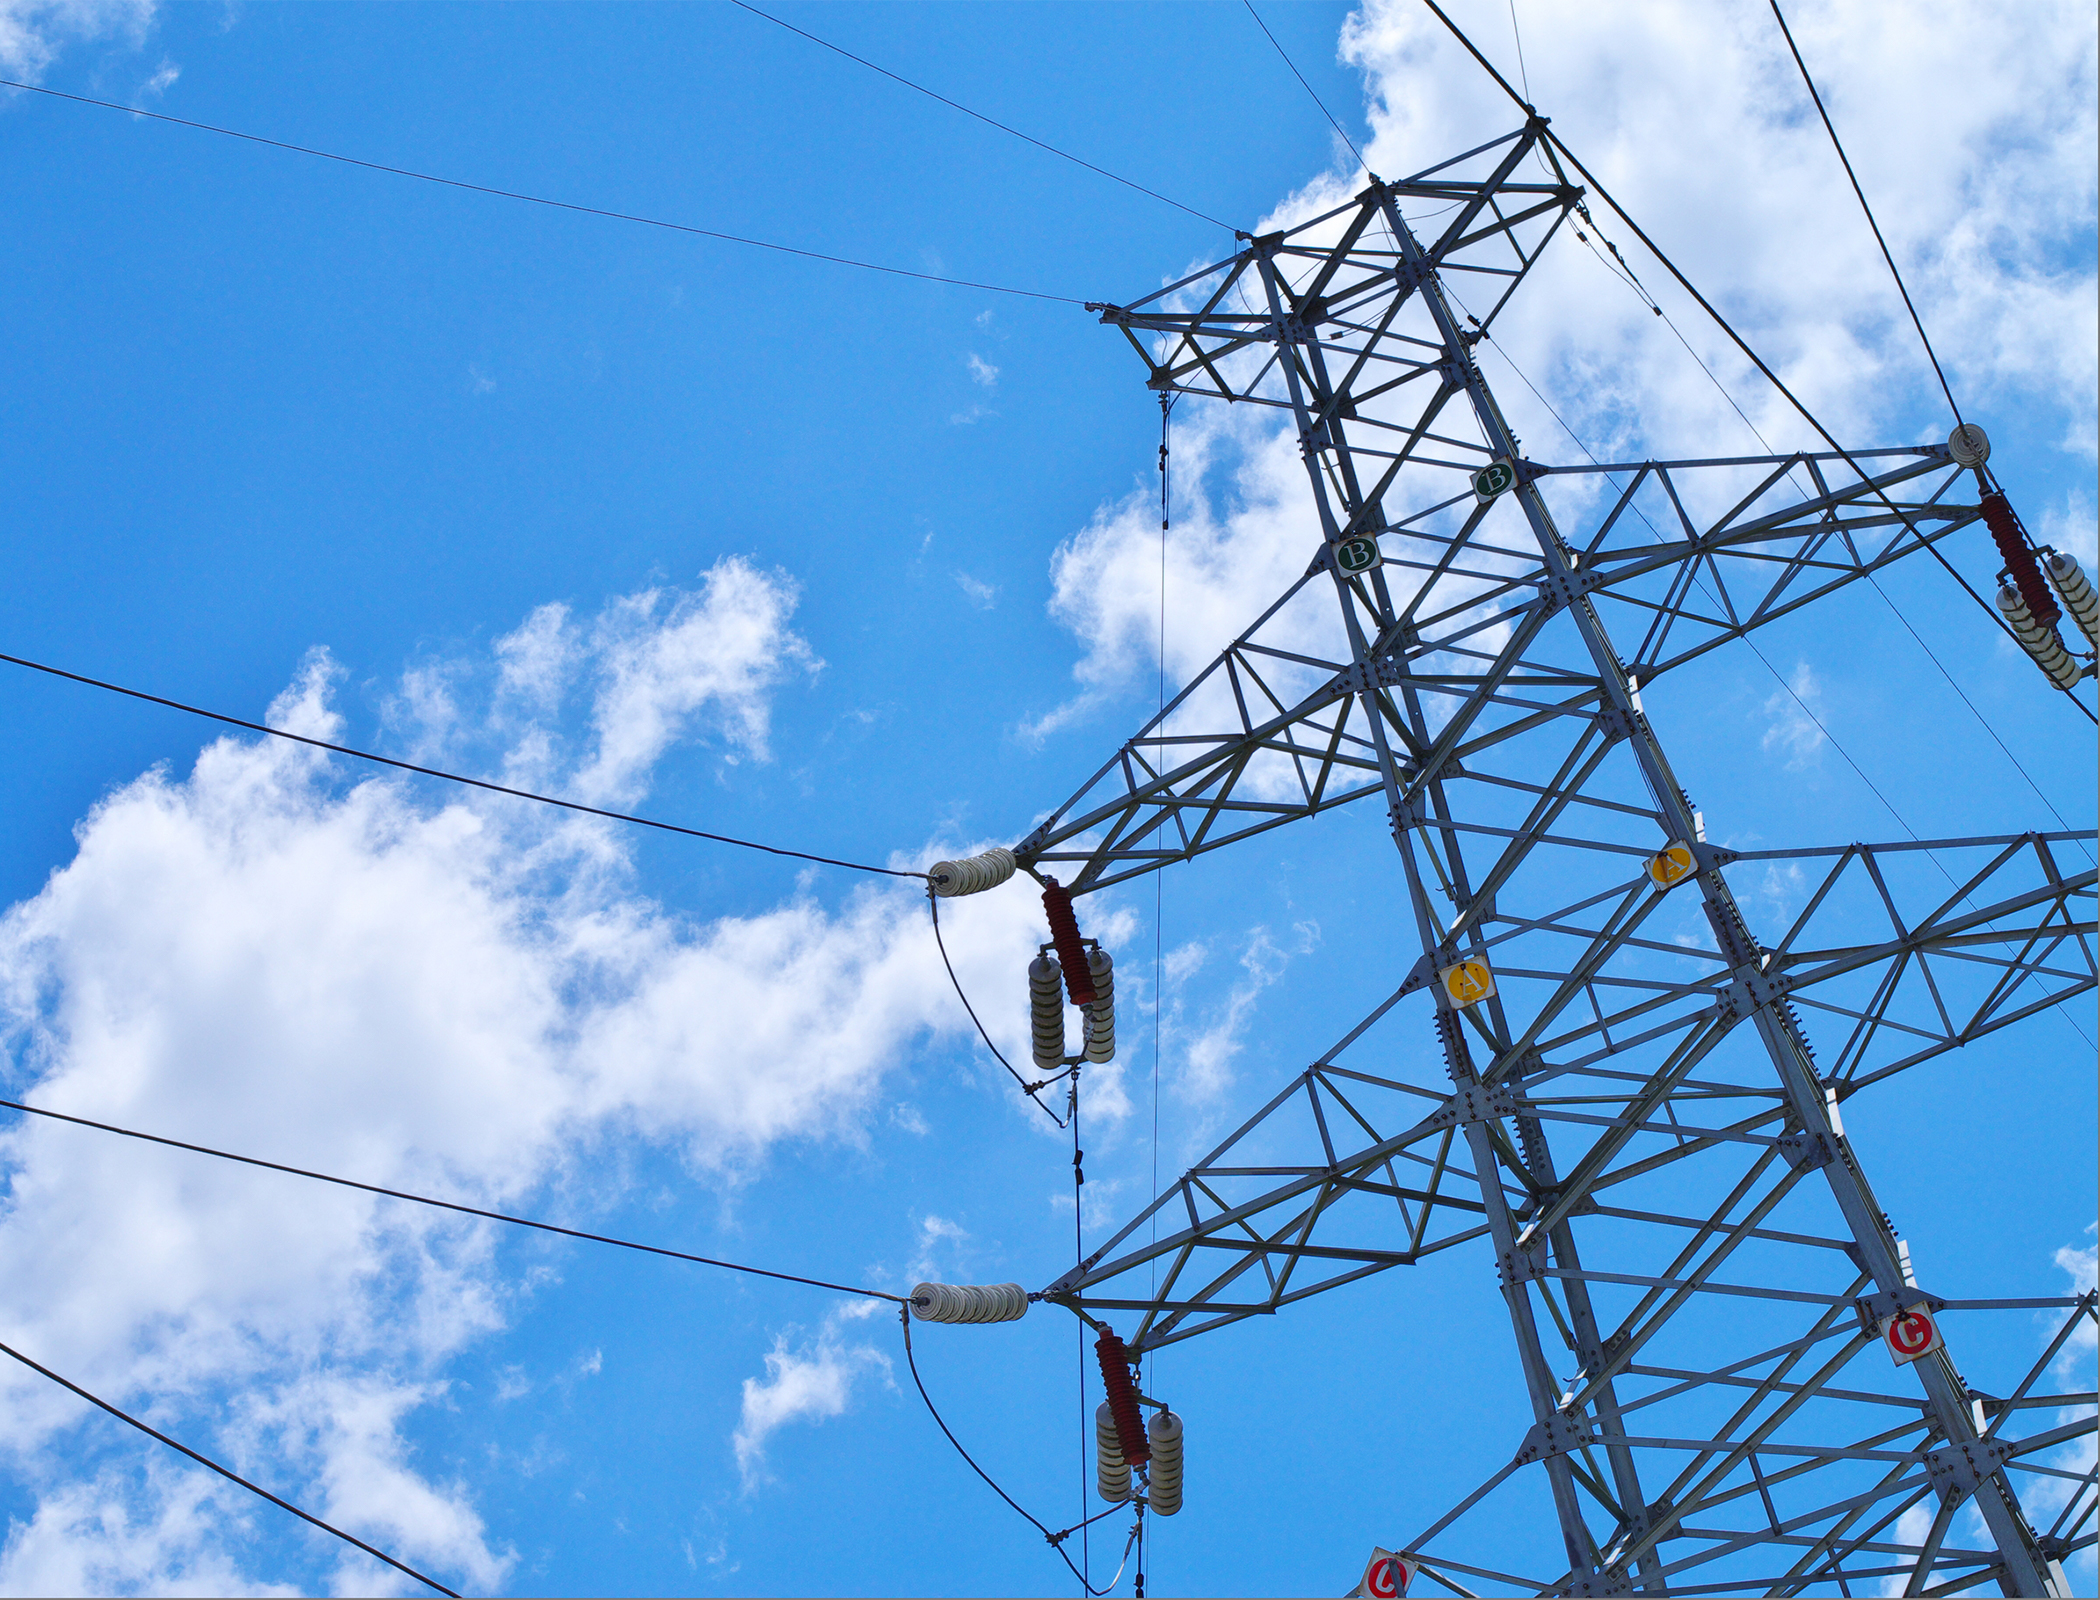 Energy grid upgrade costs could be slashed with coordinated software approach